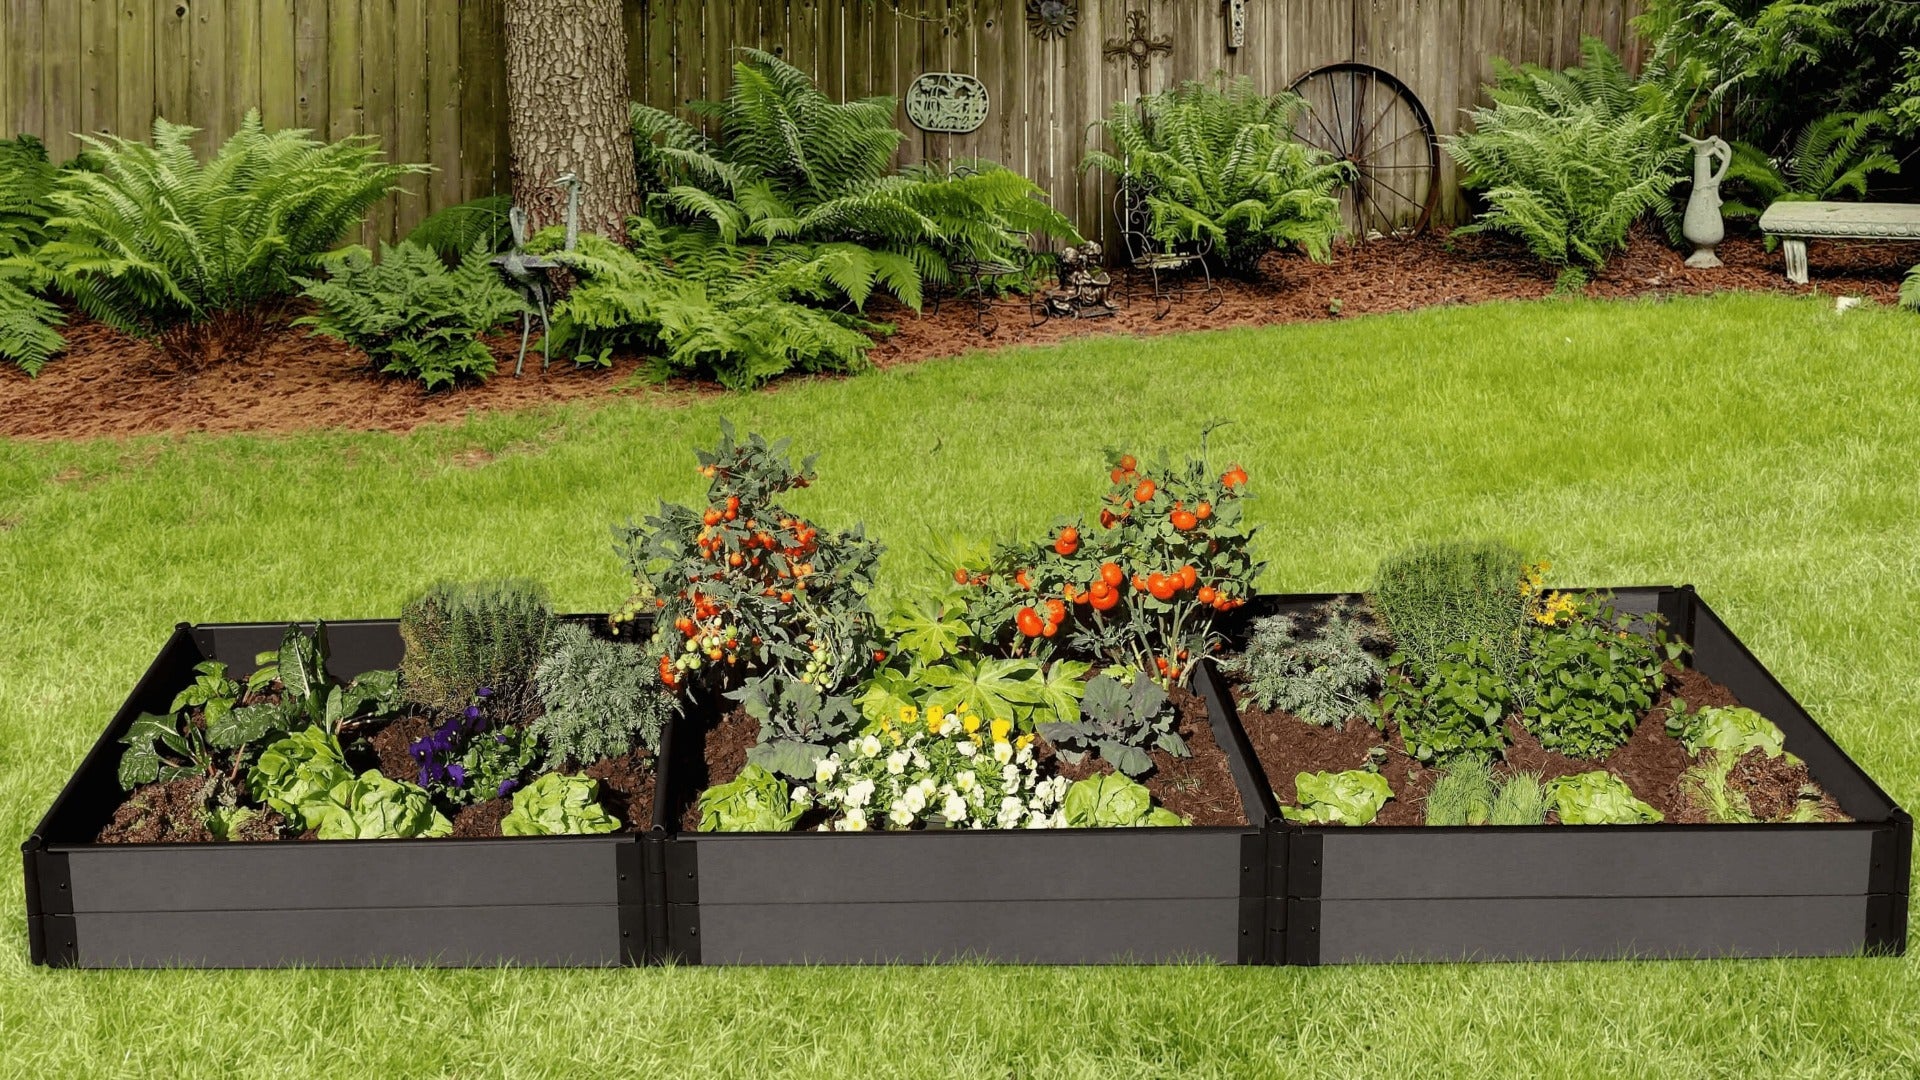 Tool-Free 4' x 12' Raised Garden Bed Raised Garden Beds Frame It All Weathered Wood 1